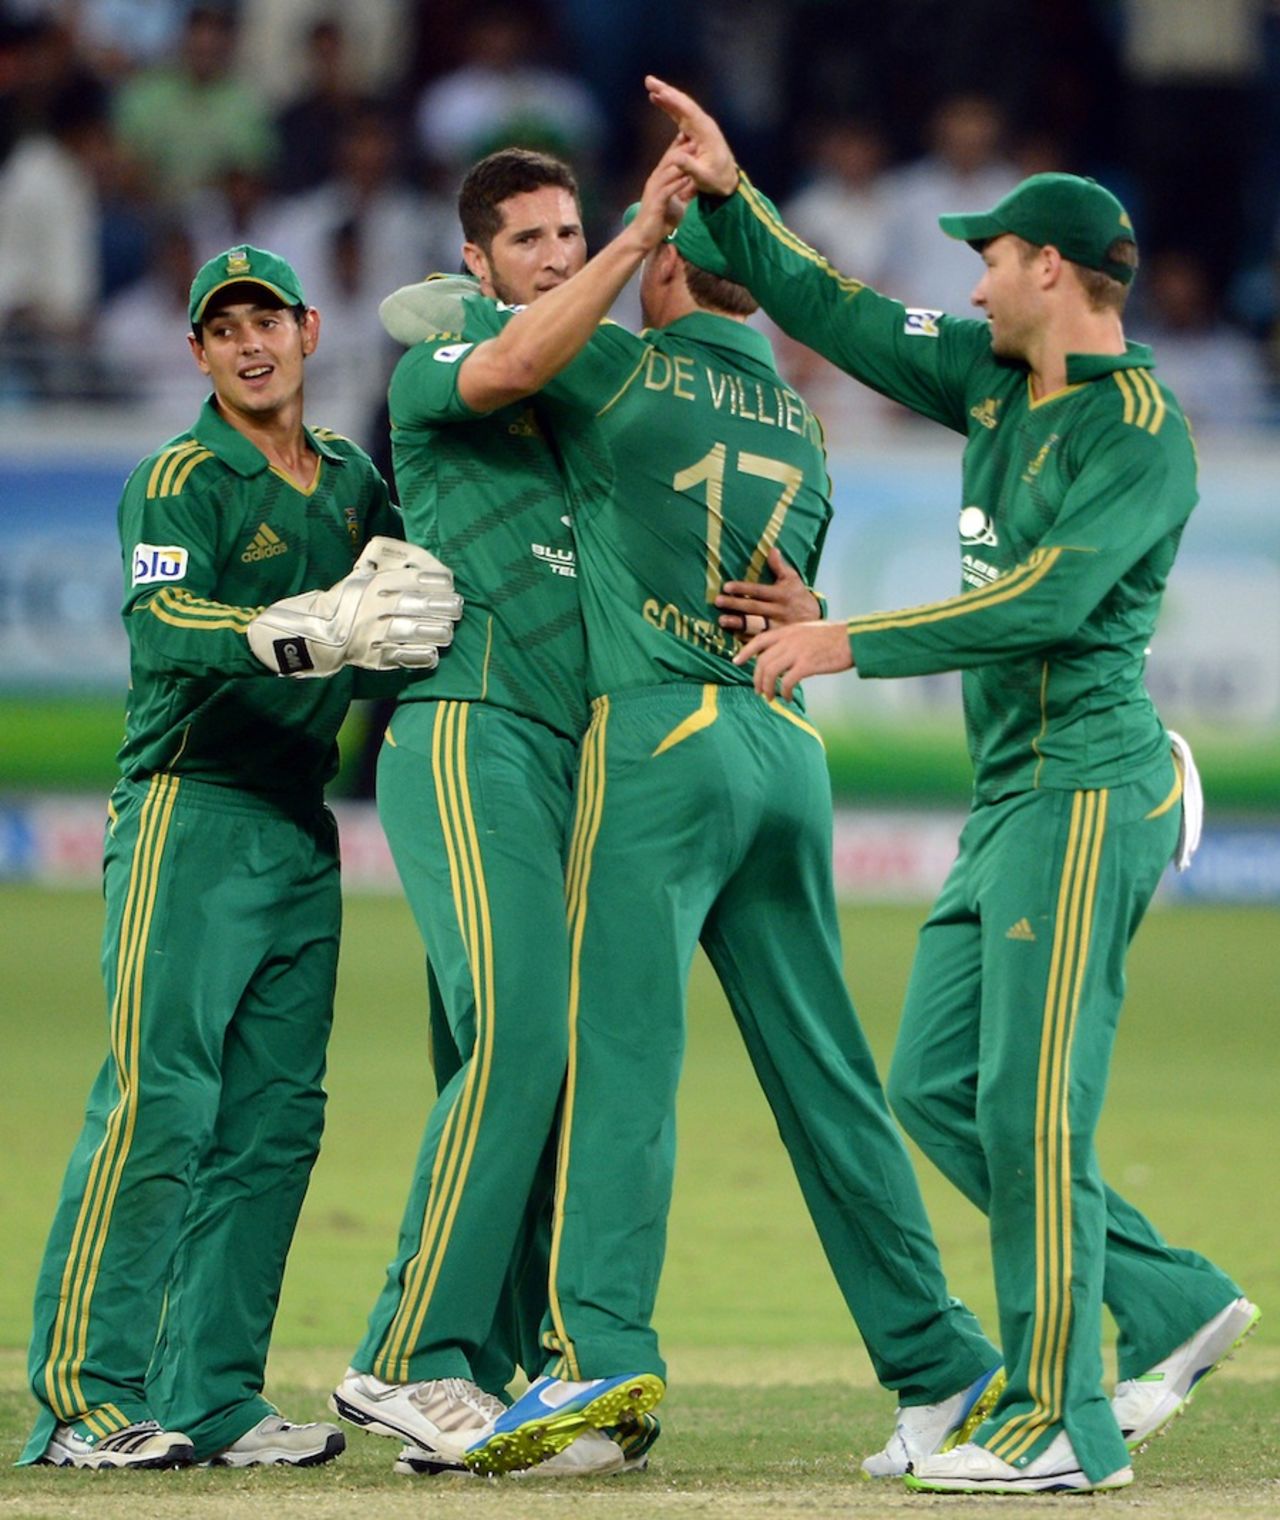 Wayne Parnell struck on his first two deliveries, Pakistan v South Africa, 2nd T20I, Dubai, November 15, 2013